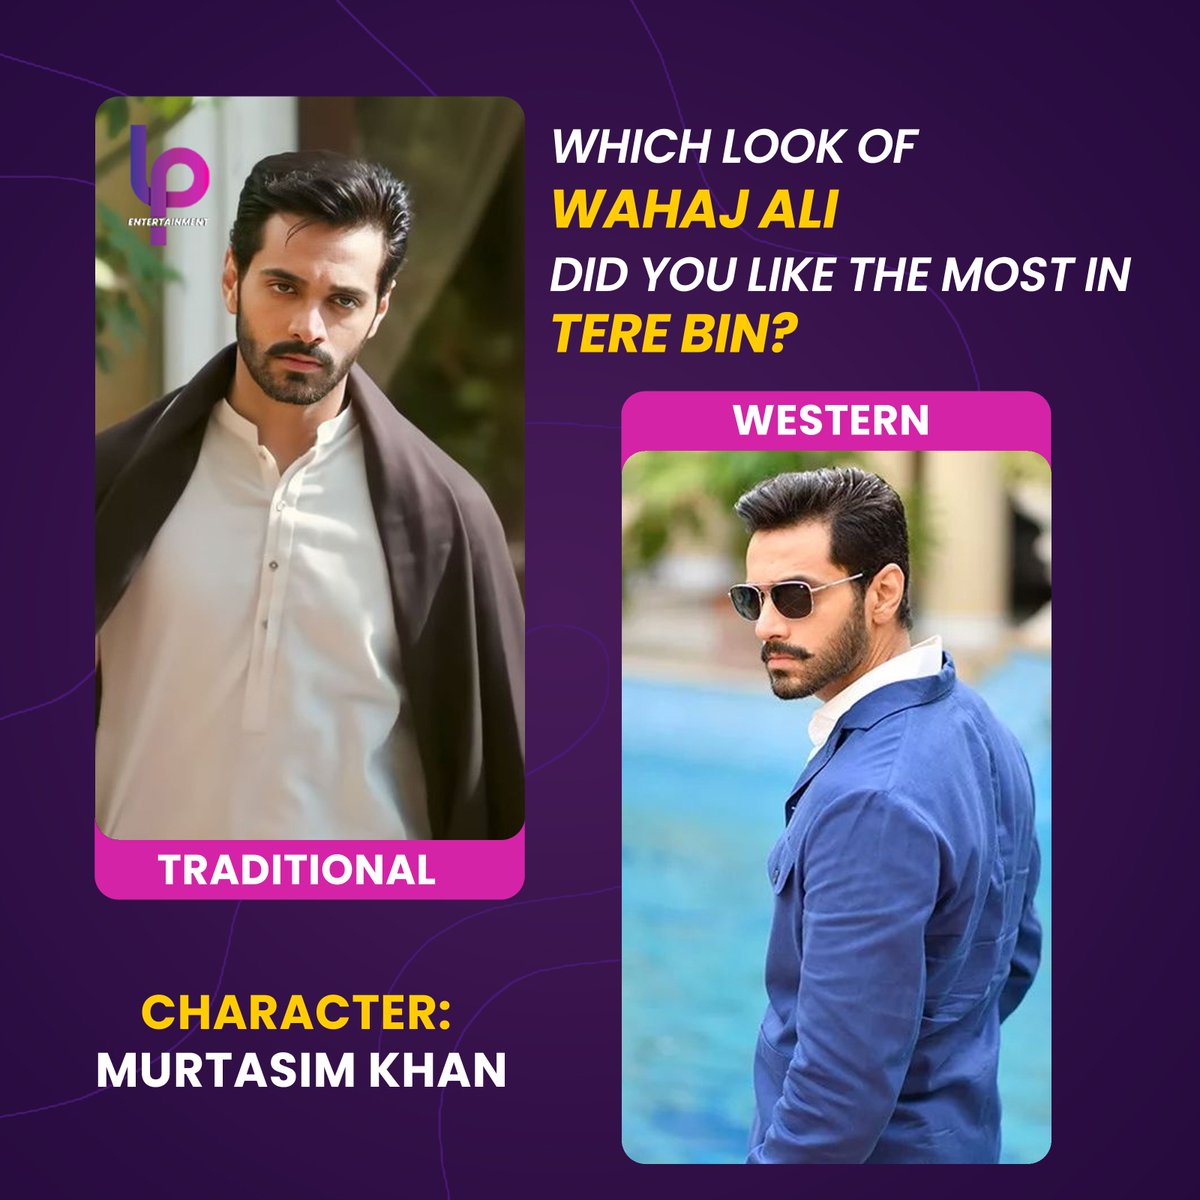 Wahaj Ali as Murtasim Khan was an absolute treat for the audience and looks played an important role too in that. 🙌🔥
Which of Wahaj Ali's look did you like the most in the Drama serial Tere Bin?
Traditional or Western?

#WahajAli #TereBin #LPEntertainment #Celebrities